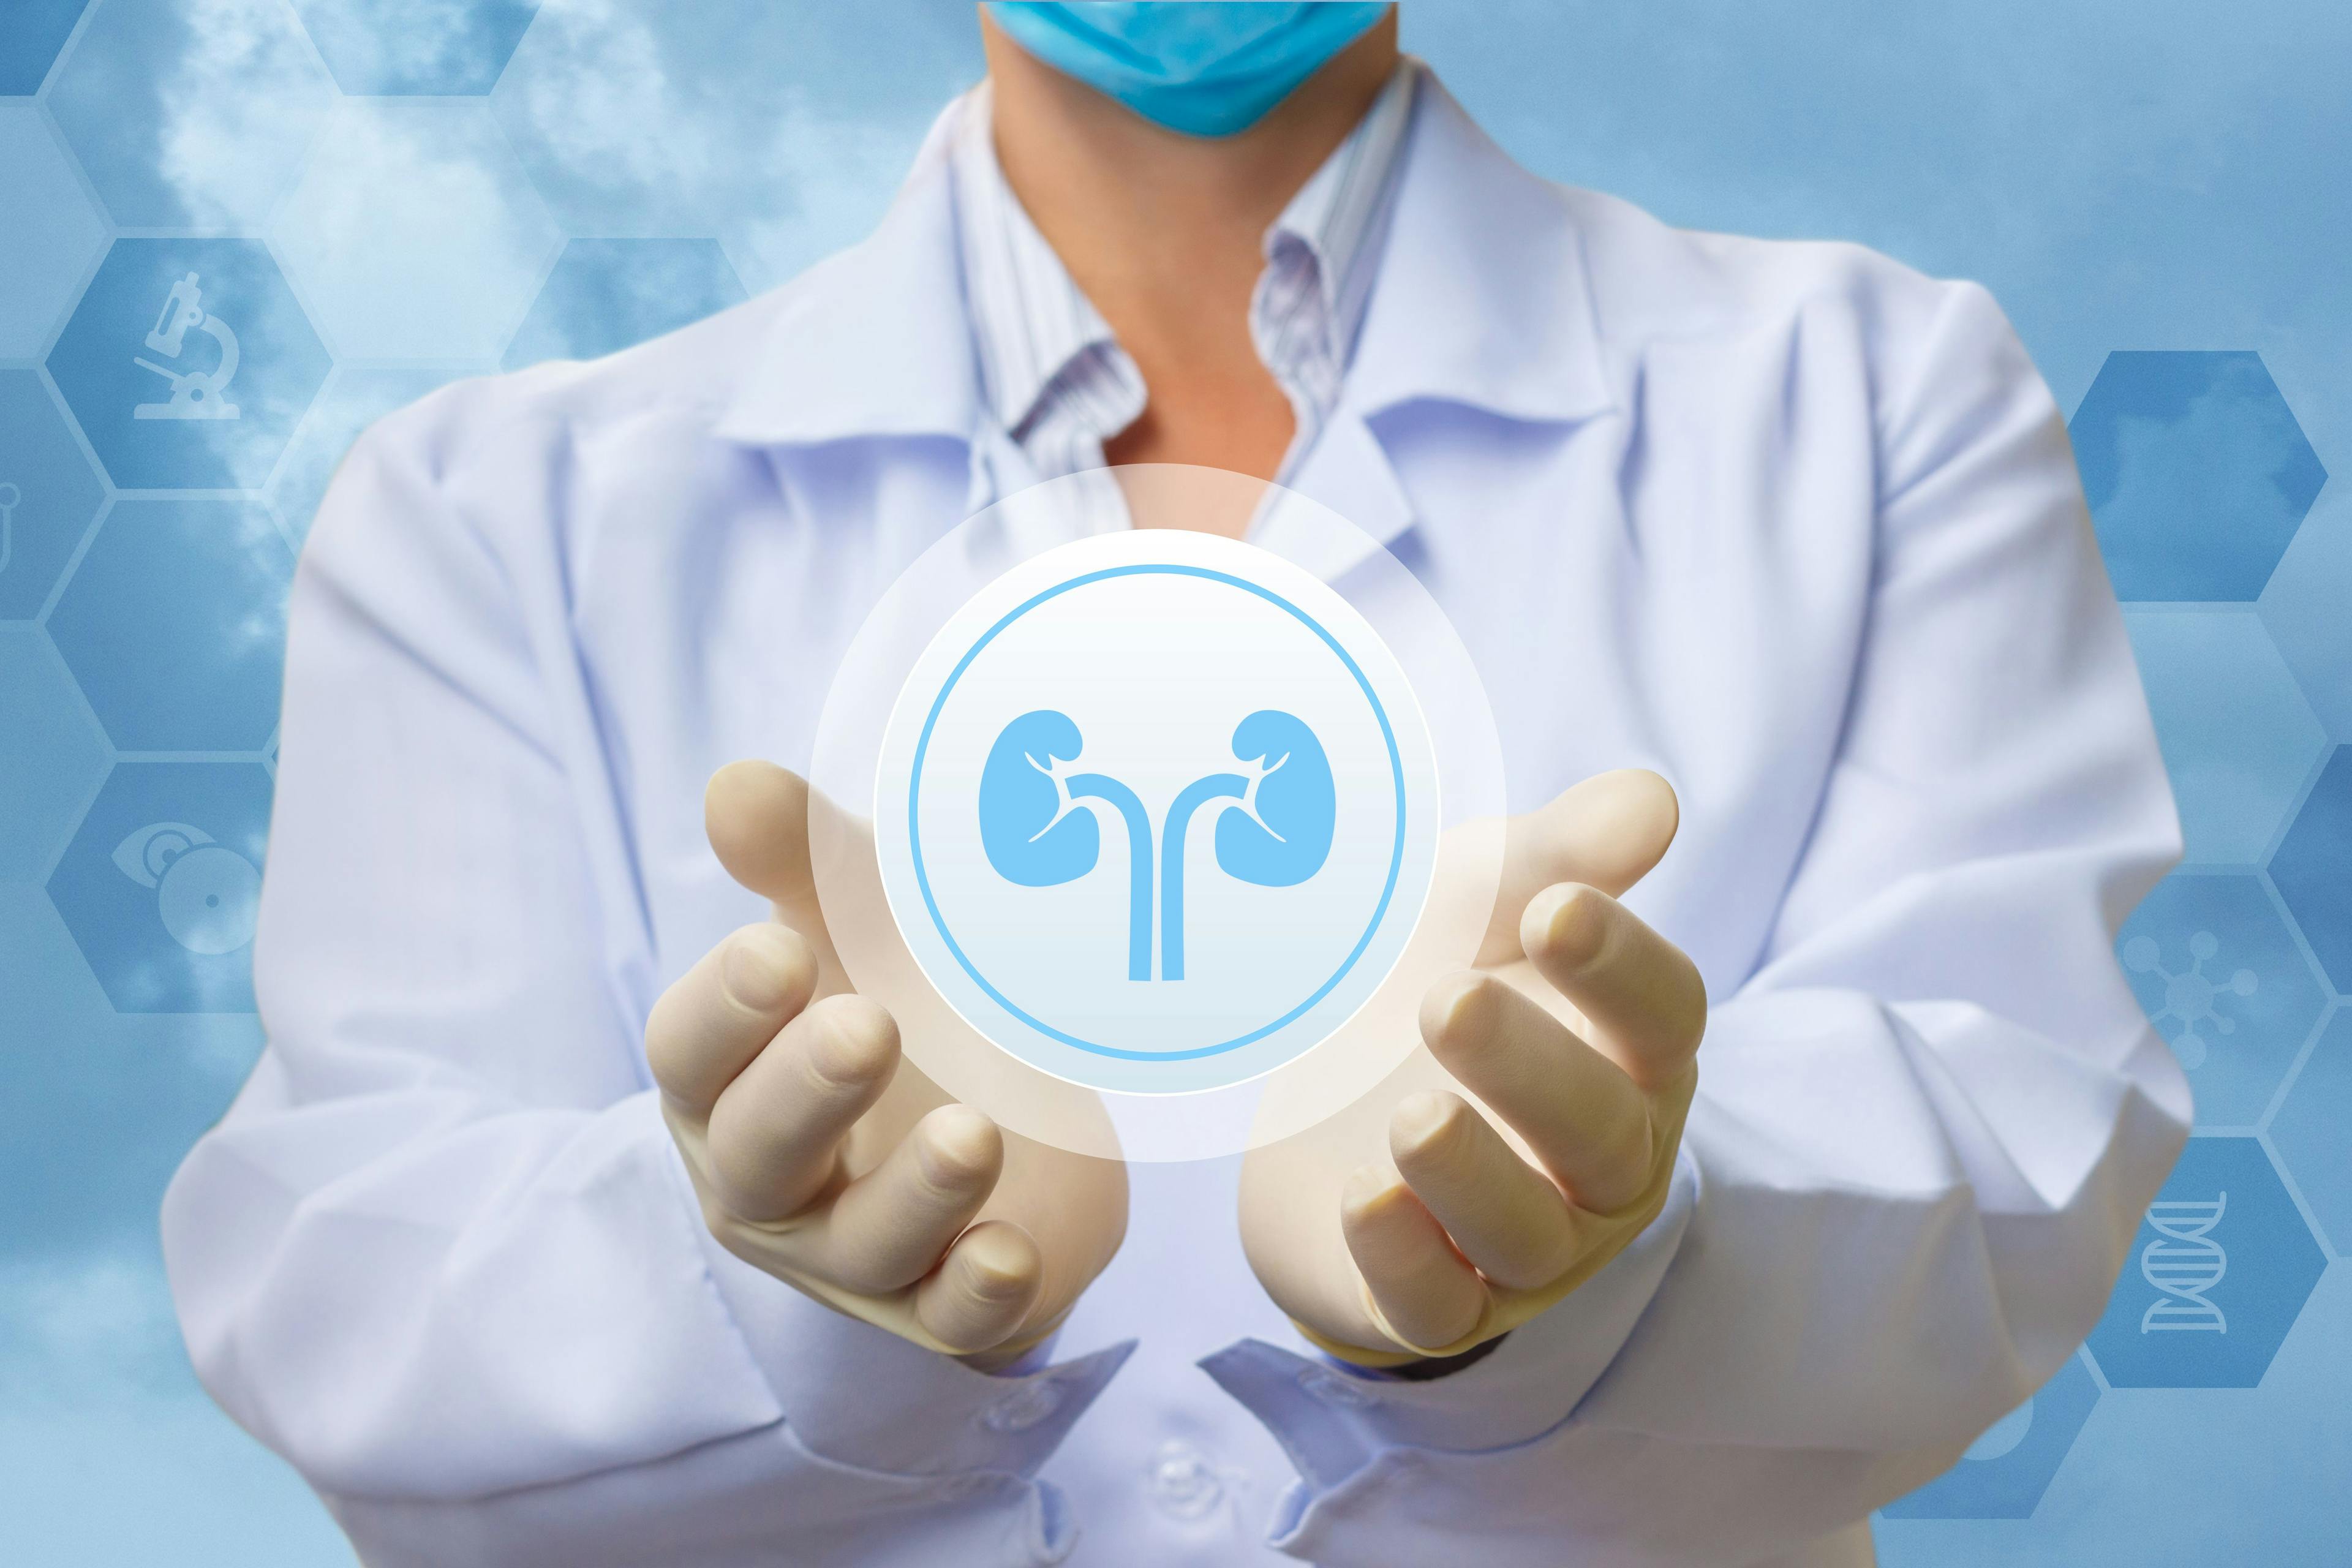 doctor in white coat with hands upturned and a digital image of a kidney floating above hands